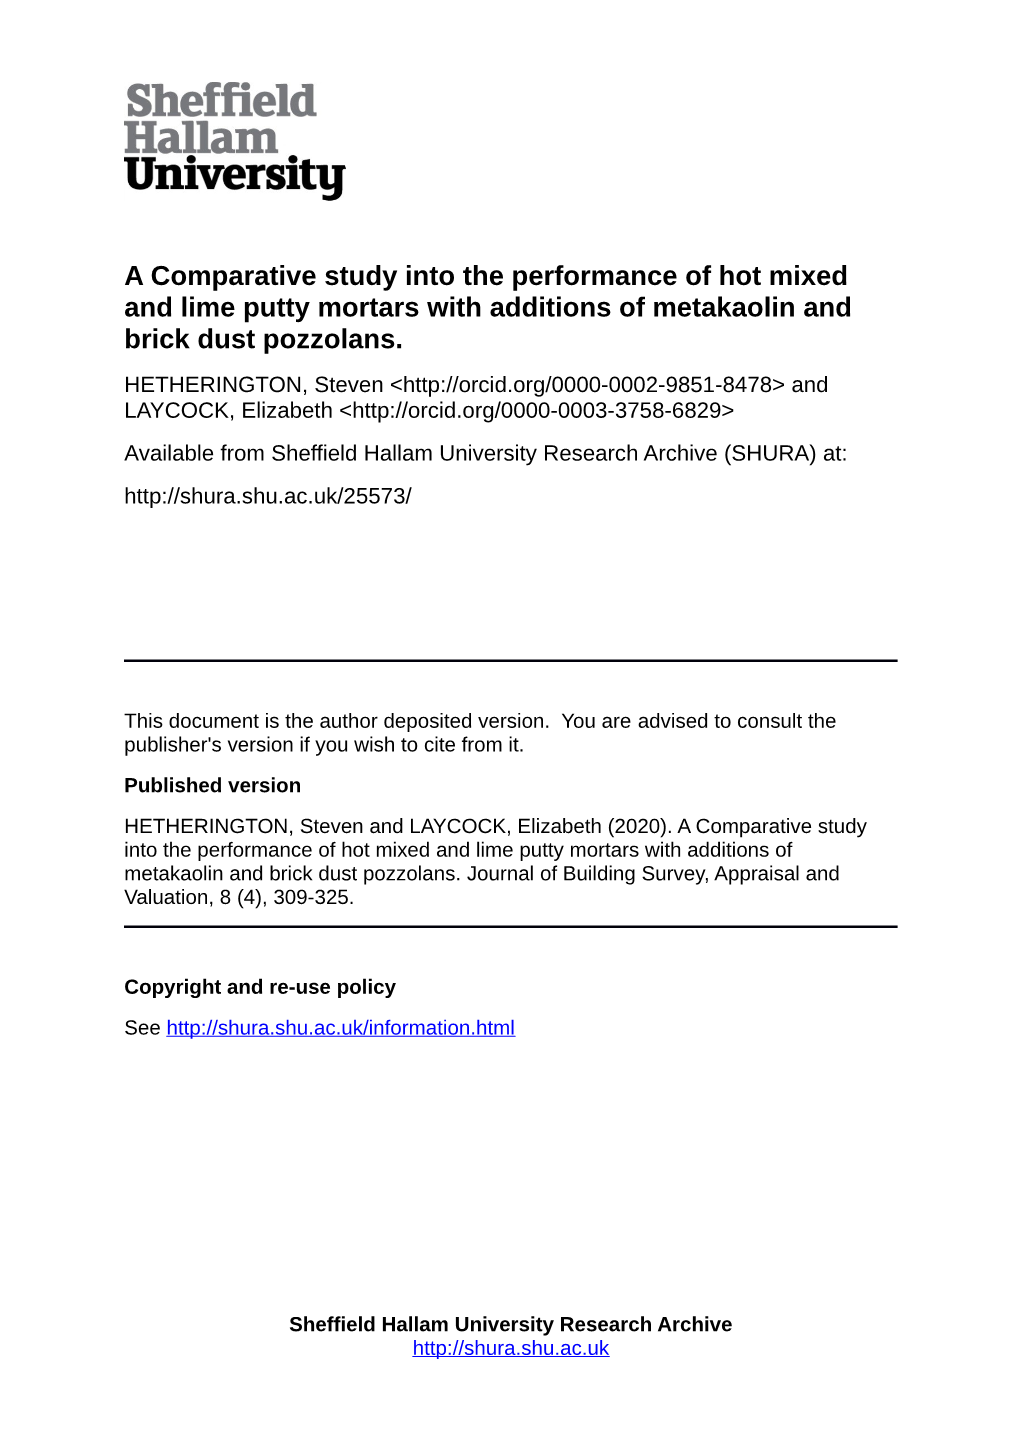 A Comparative Study Into the Performance of Hot Mixed and Lime Putty Mortars with Additions of Metakaolin and Brick Dust Pozzolans